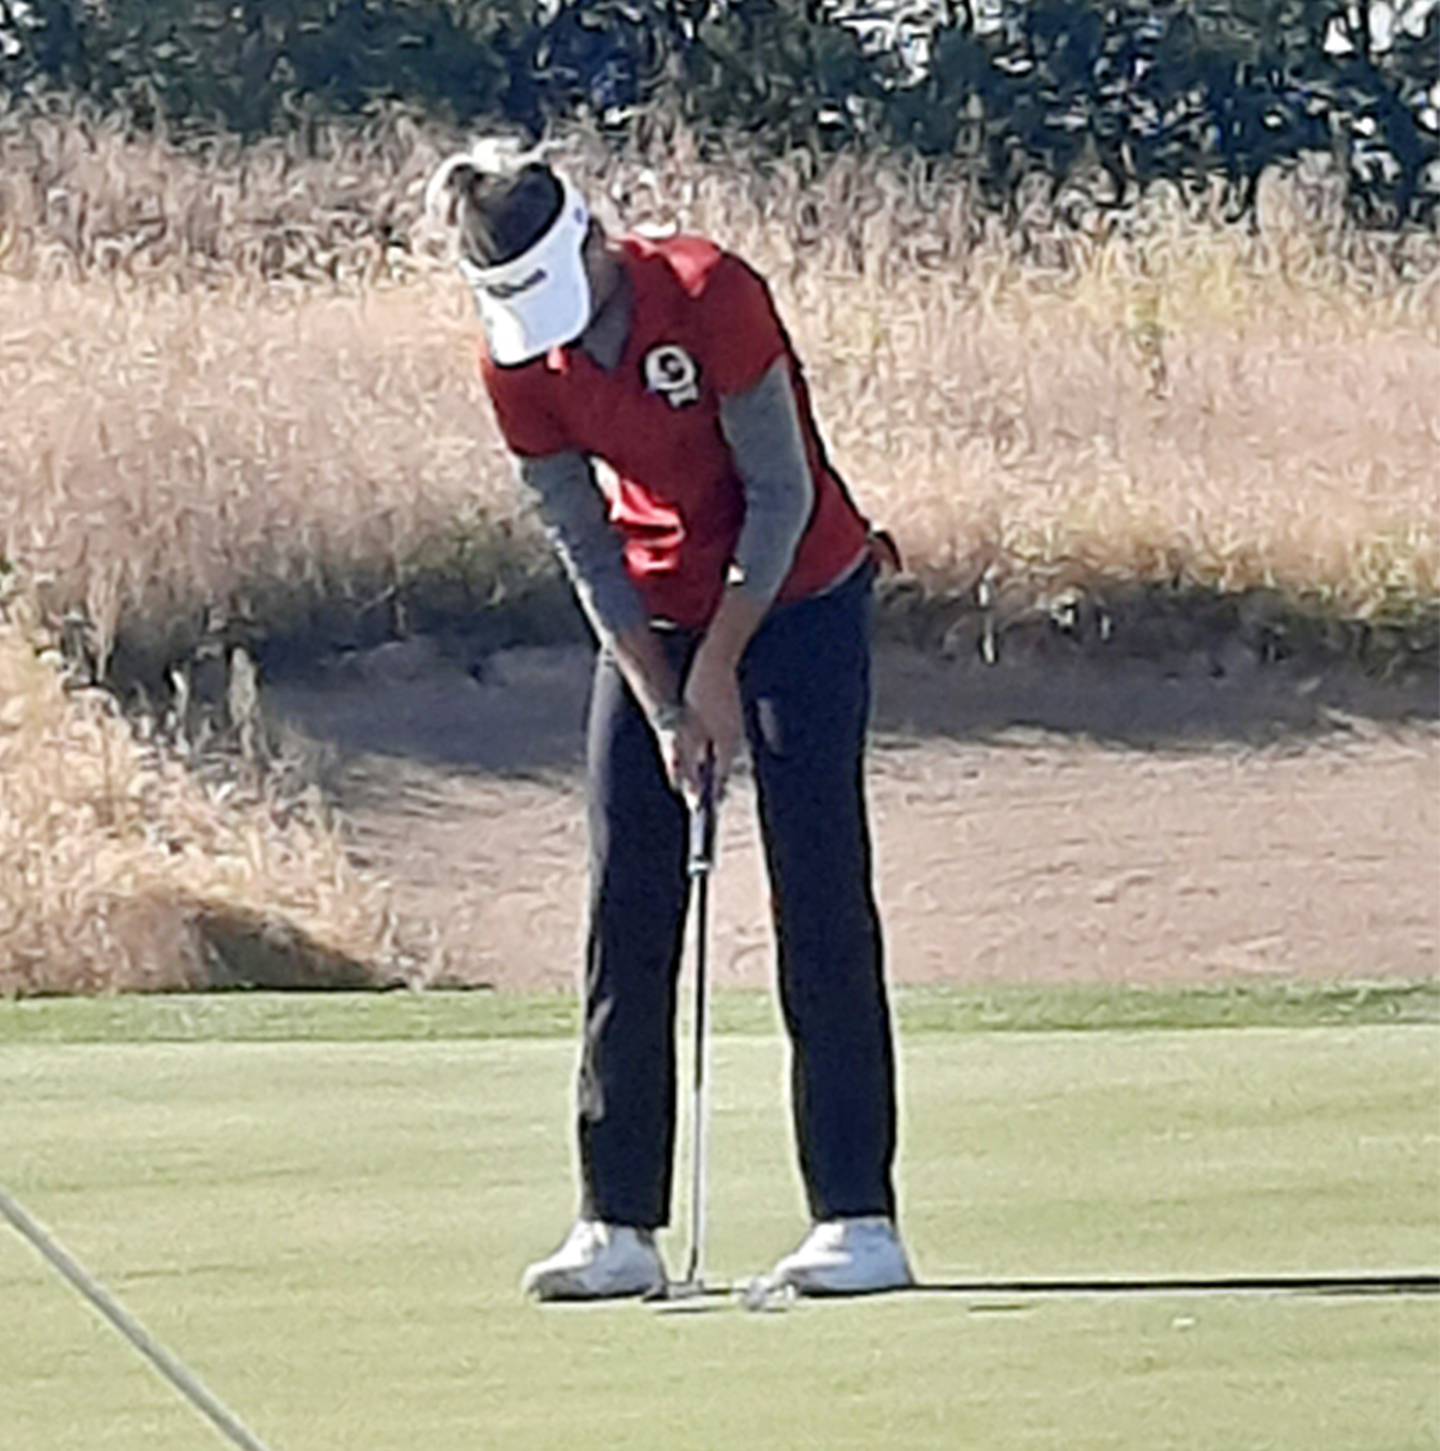 Oregon senior Ava Hackman putts during the Class 1A State Tournament on Saturday, Oct. 8, 2022 at Red Tail Run Golf Course in Decatur. Hackman tied for 21st with a two-day total of 15-over-par 159.